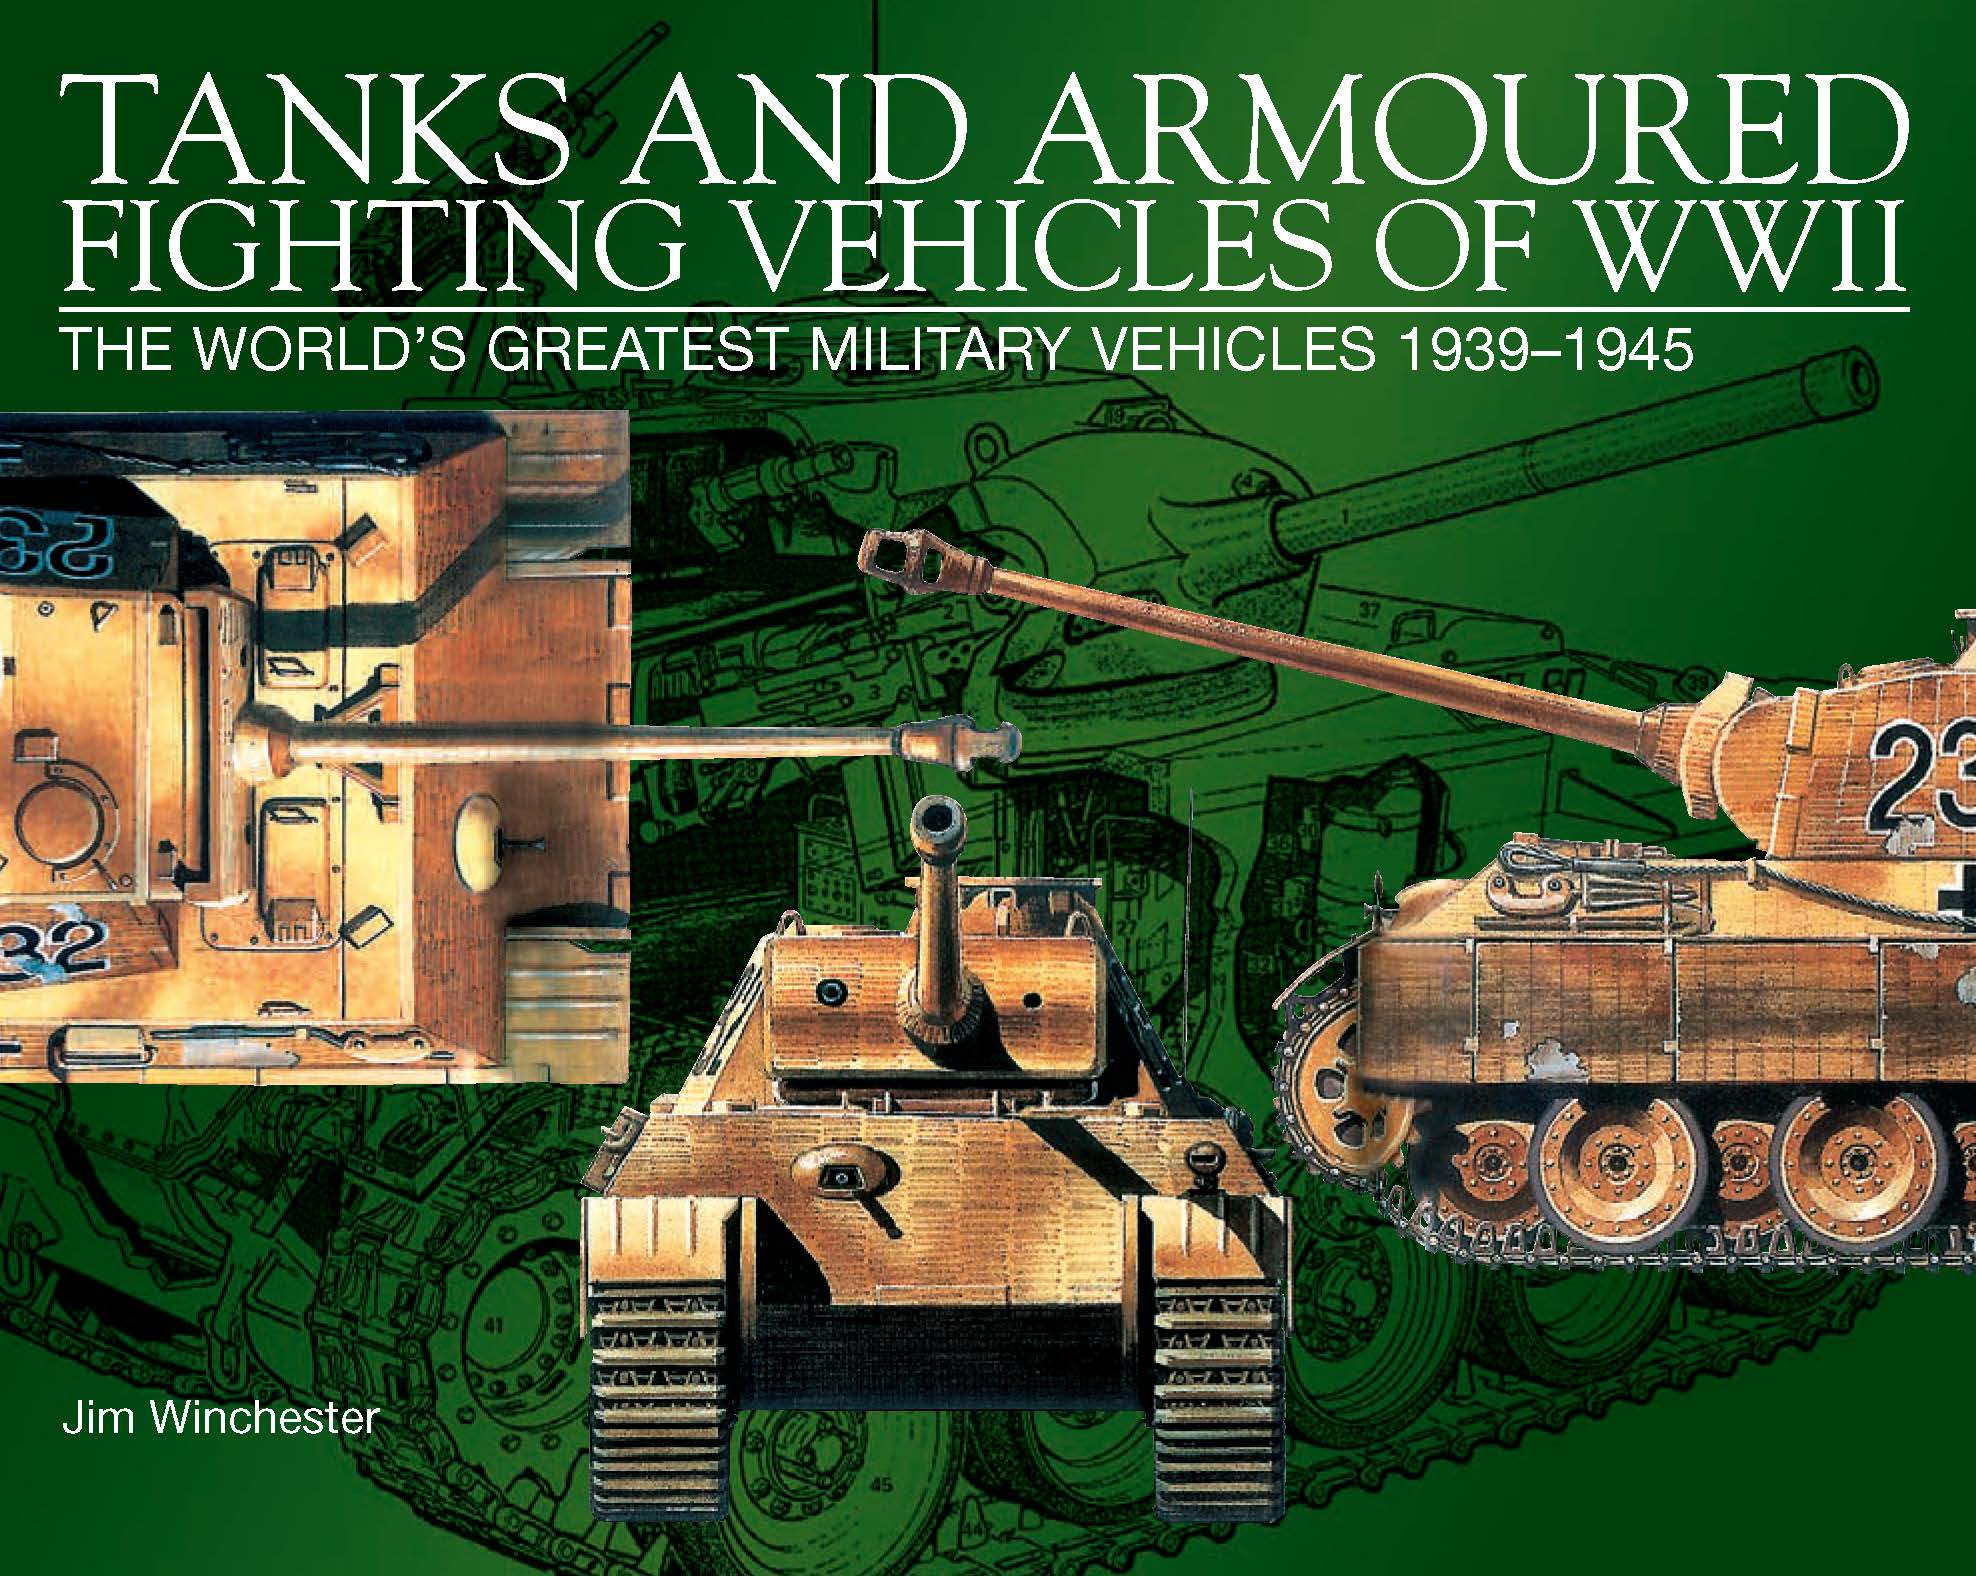 Tanks And Armoured Fighting Vehicles Of World War Ii Amber Books